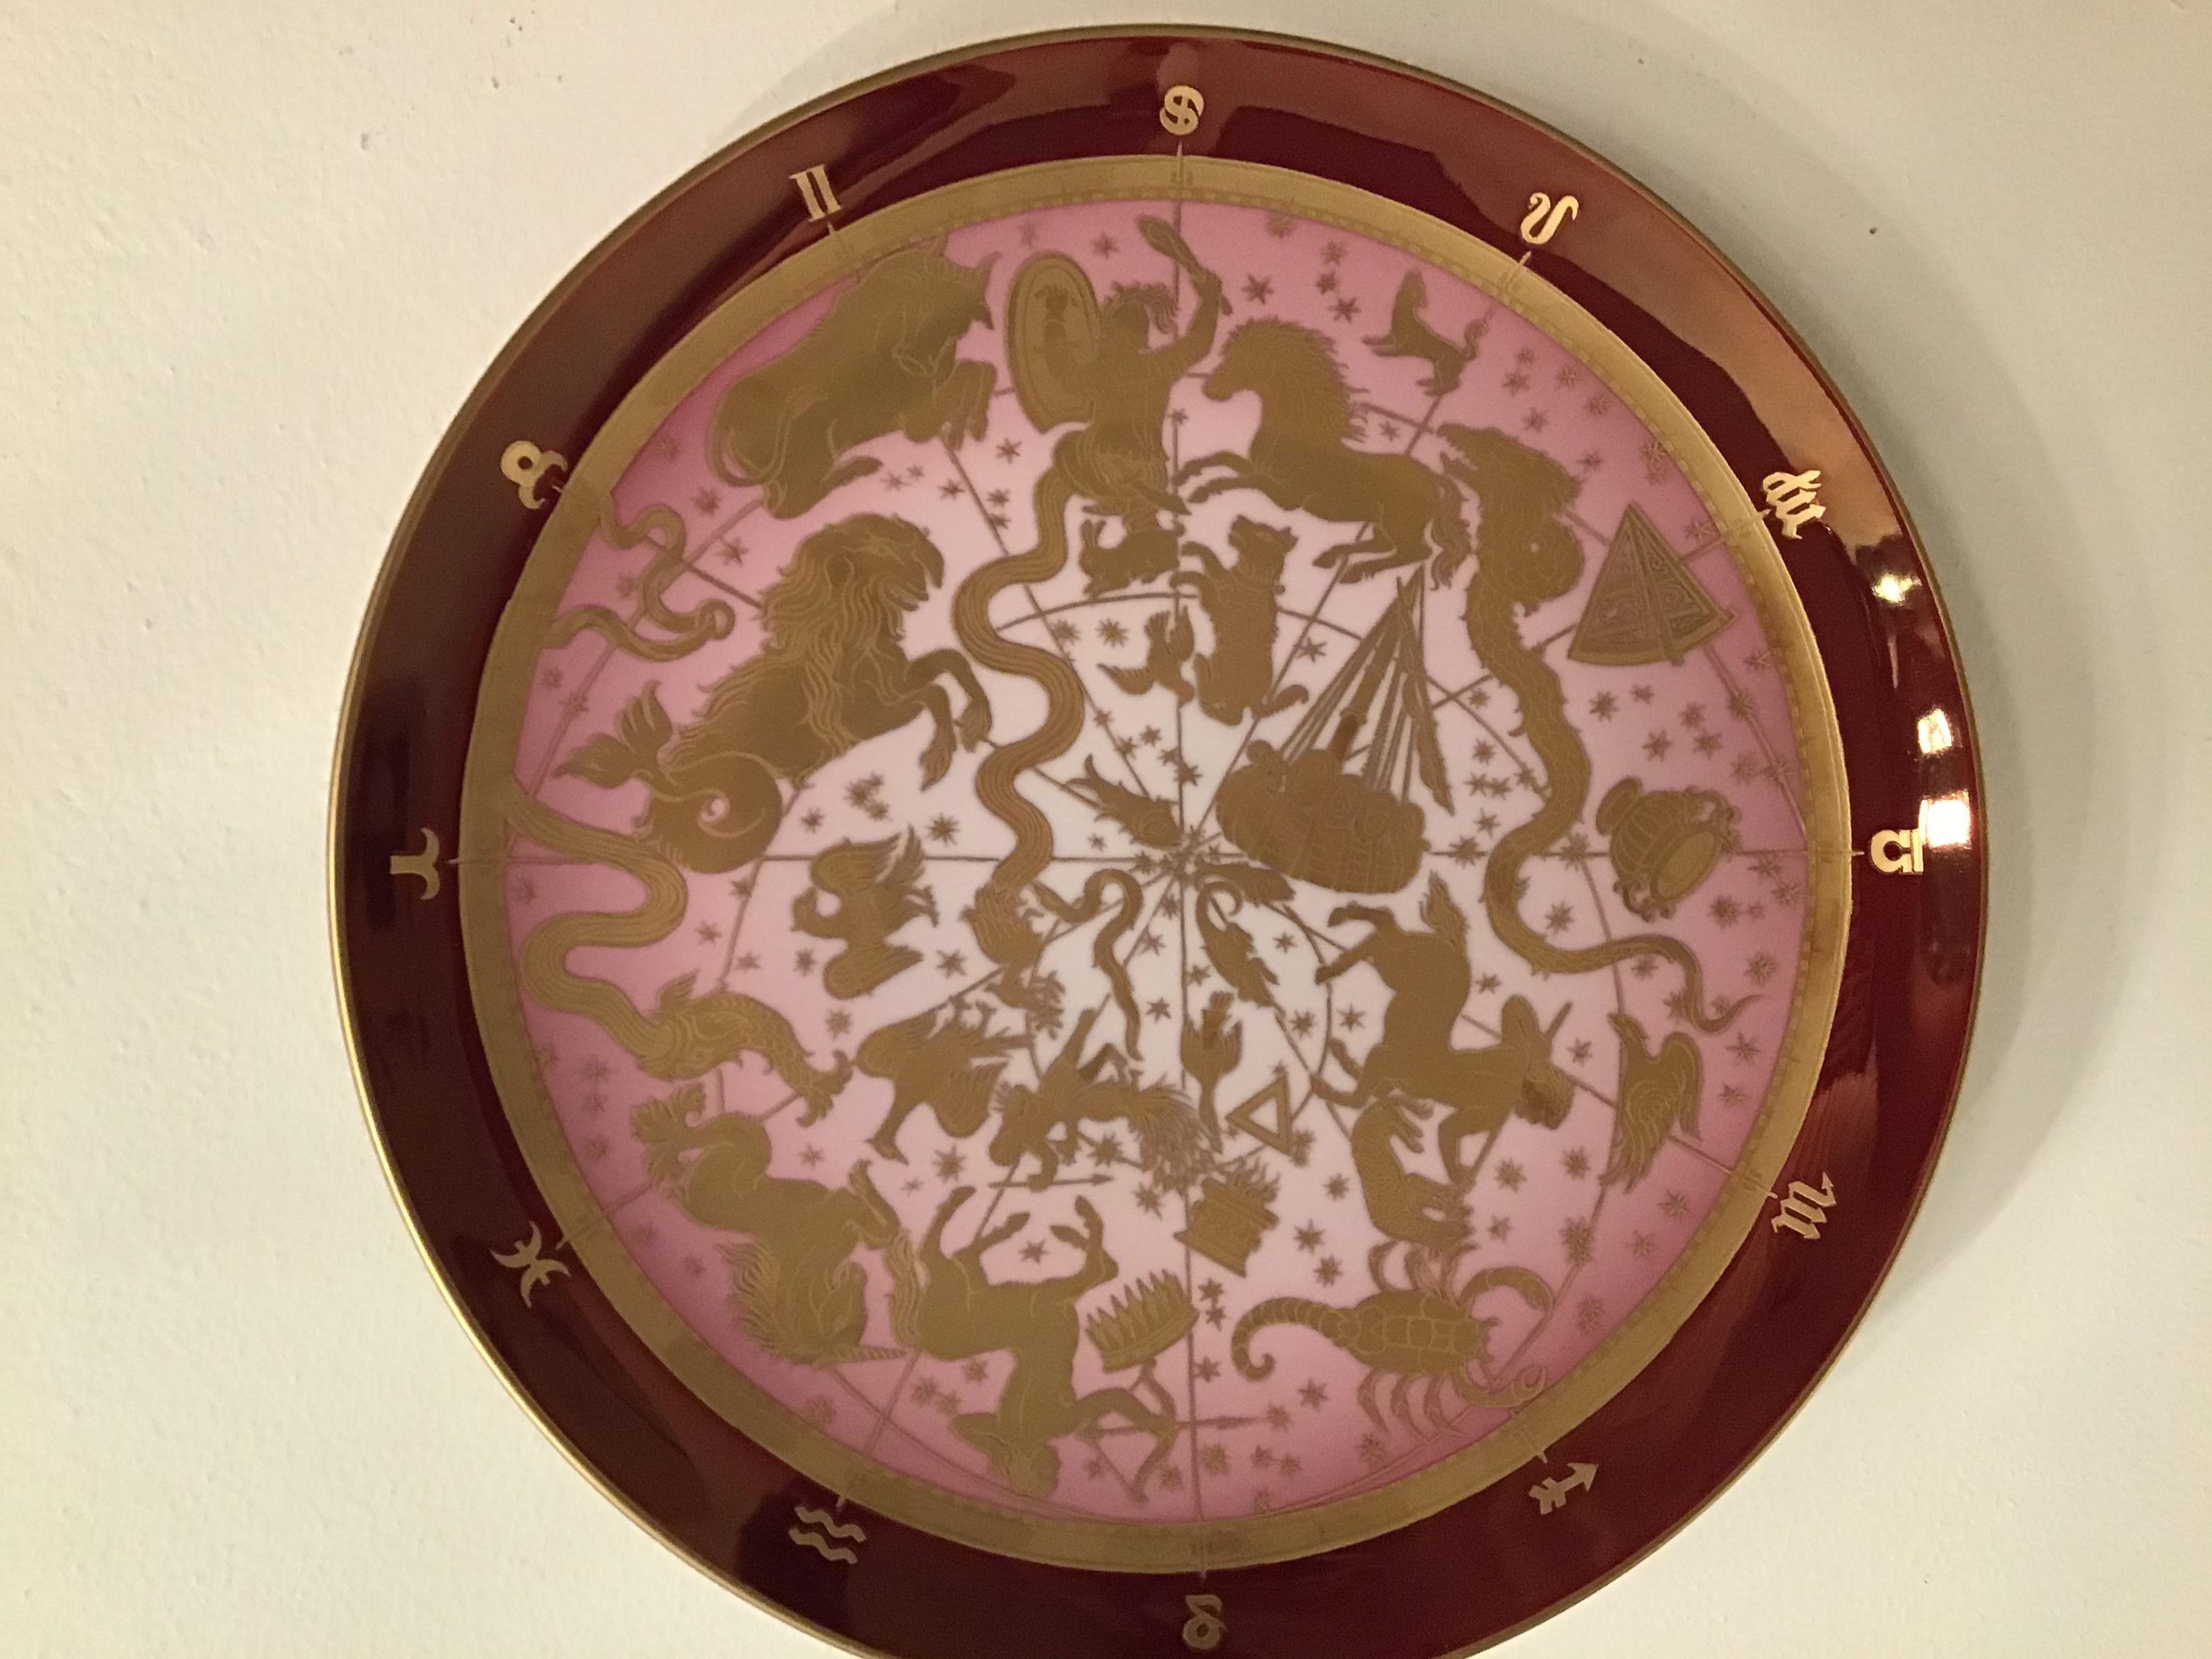 Morbelli Porcelain Wall Plate “Planisfero Celeste“ Worked with Pure Gold 1960 IT For Sale 3